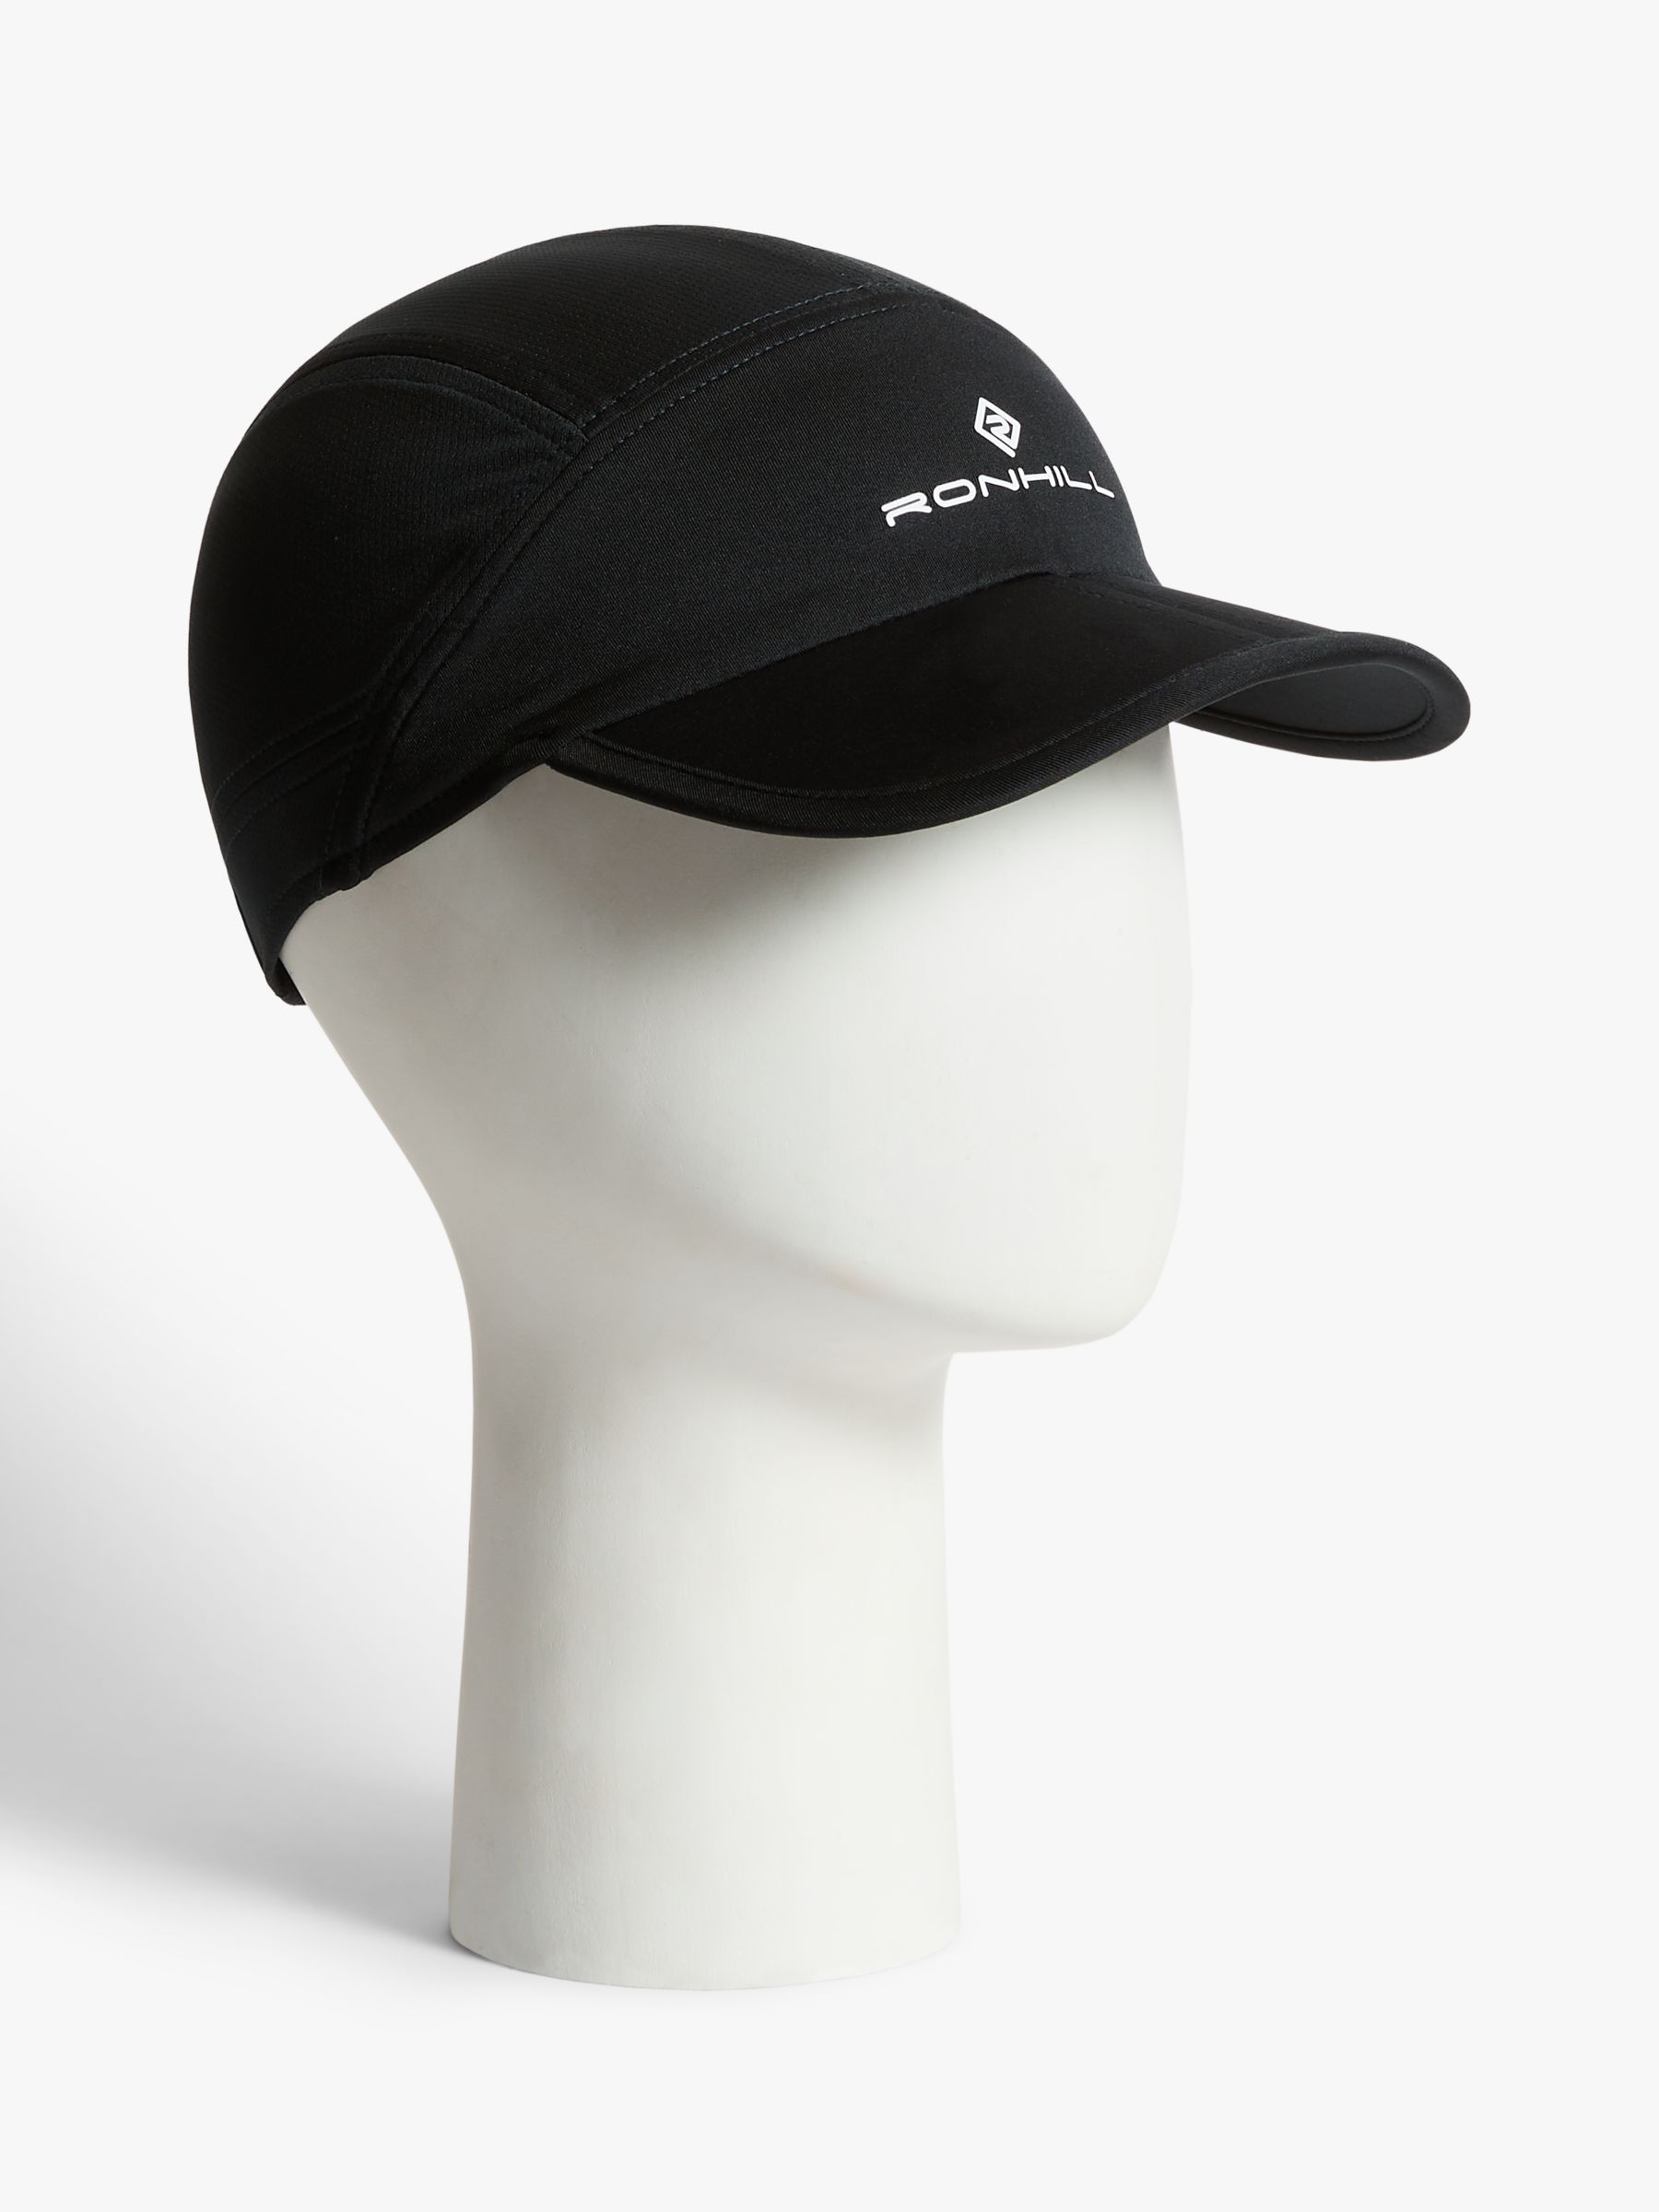 Ronhill Sun Split Cap Running Outdoor Fitness Hat With Wicking Bright White